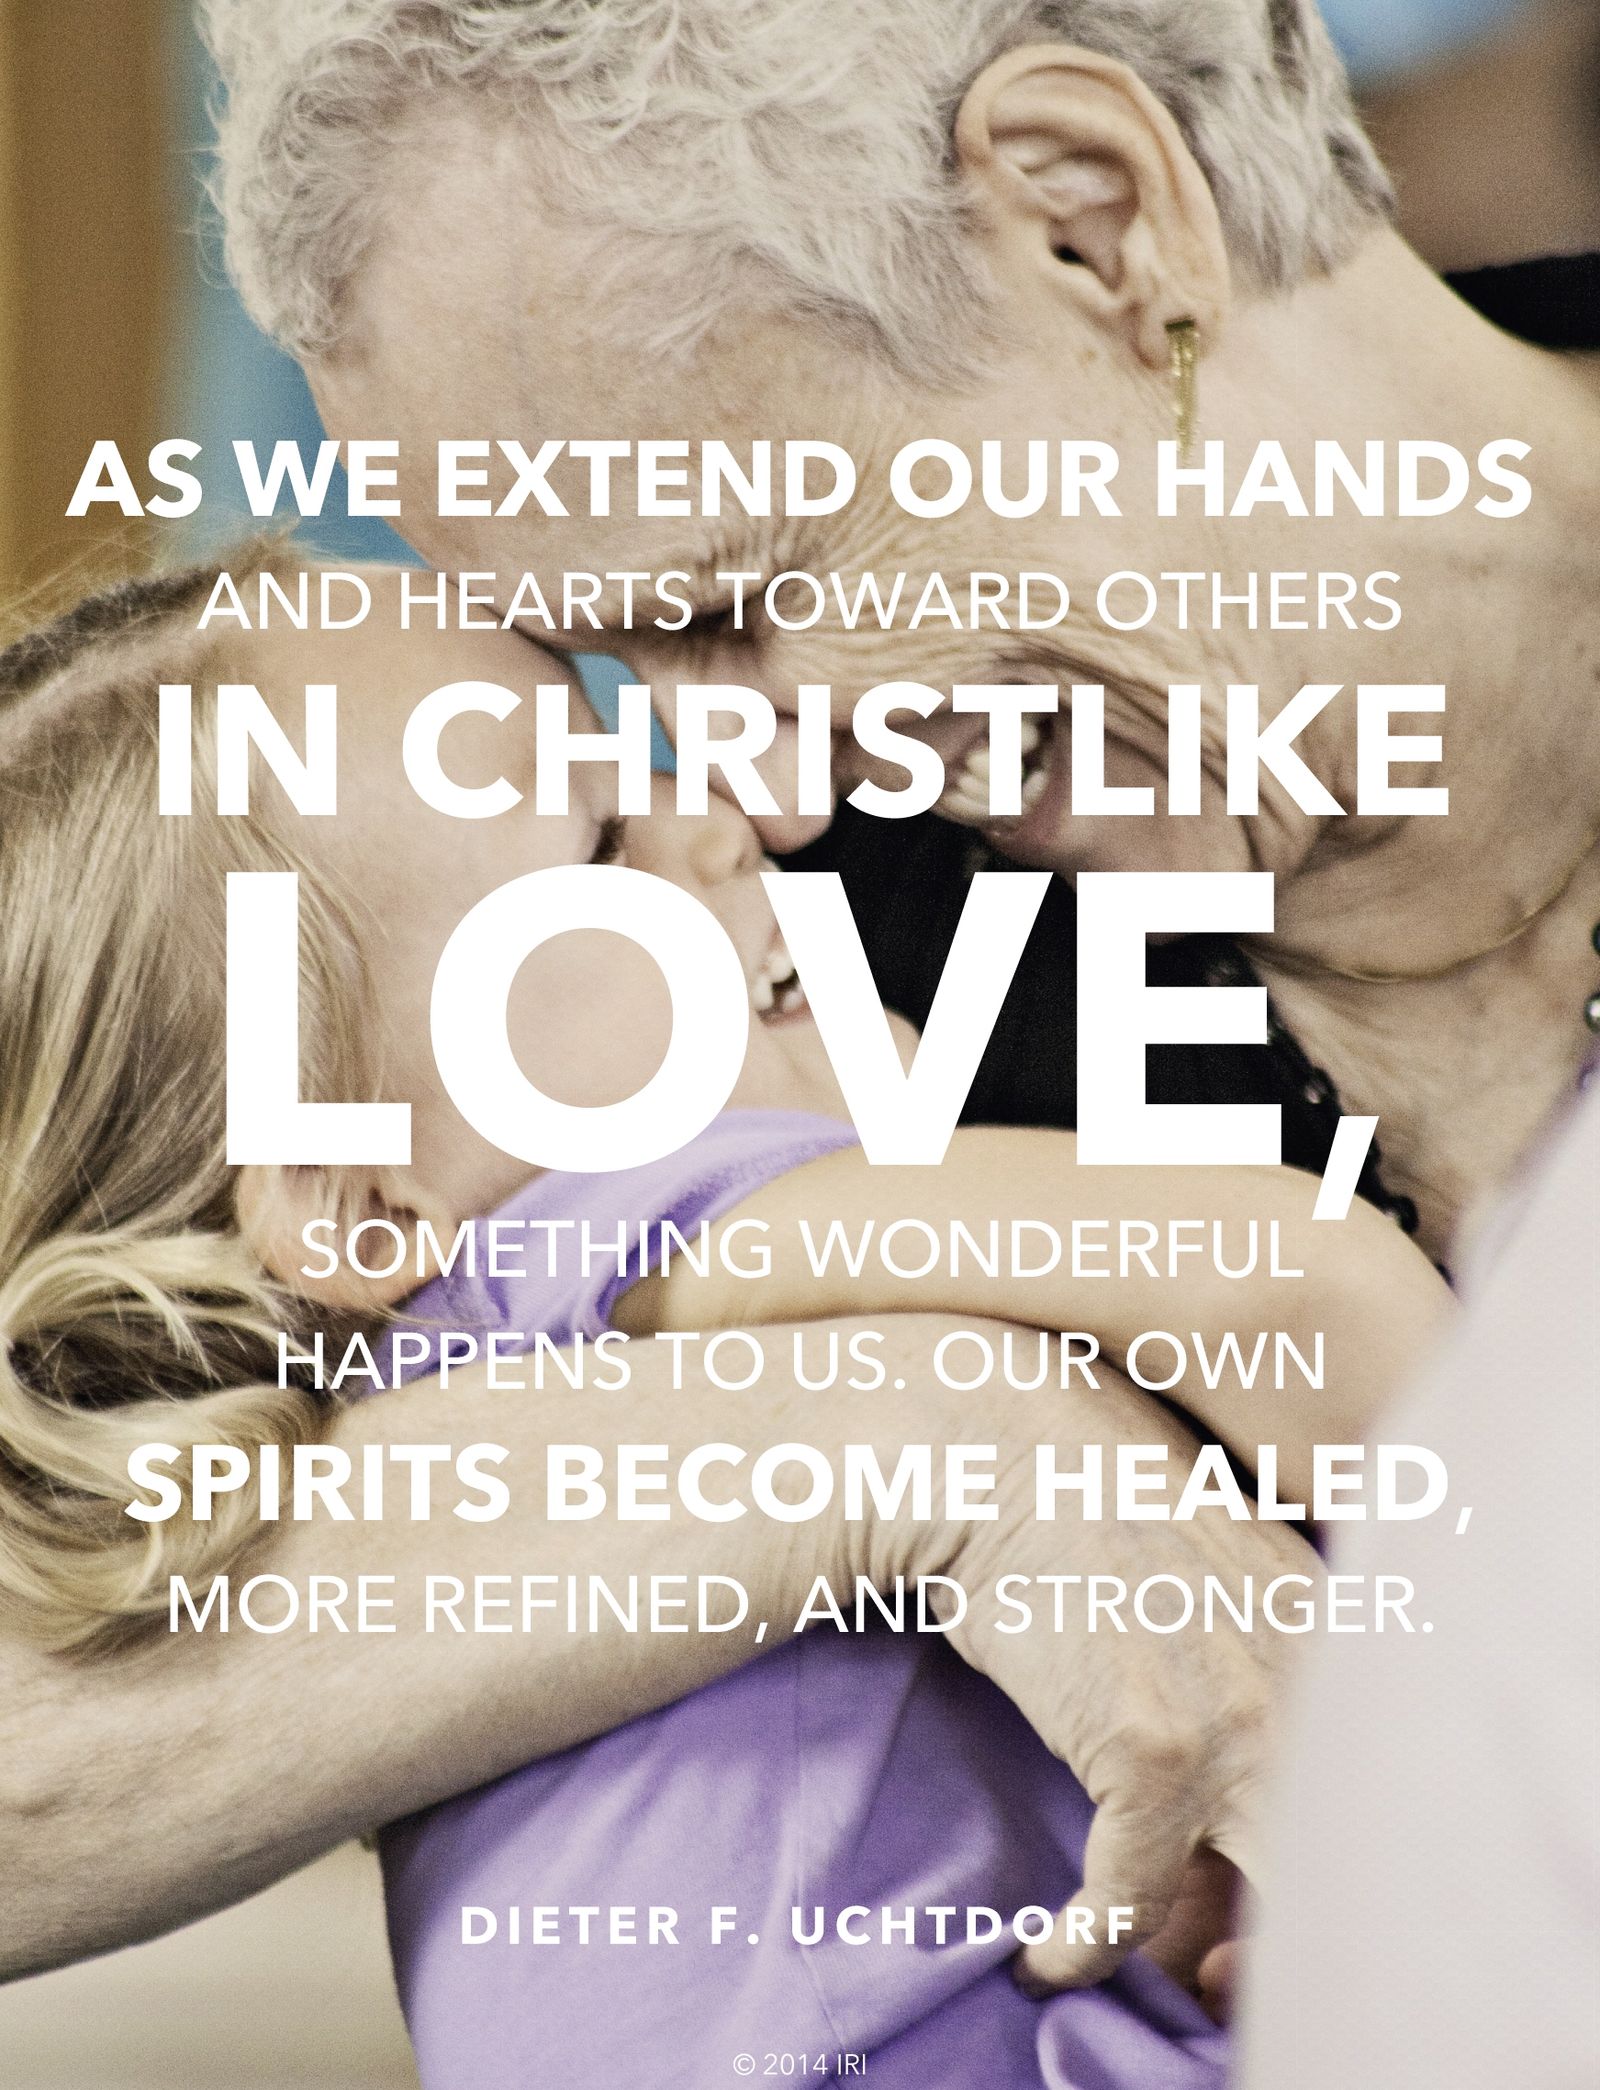 “As we extend our hands and hearts toward others in Christlike love, something wonderful happens to us. Our own spirits become healed, more refined, and stronger.”—President Dieter F. Uchtdorf, “You Are My Hands”